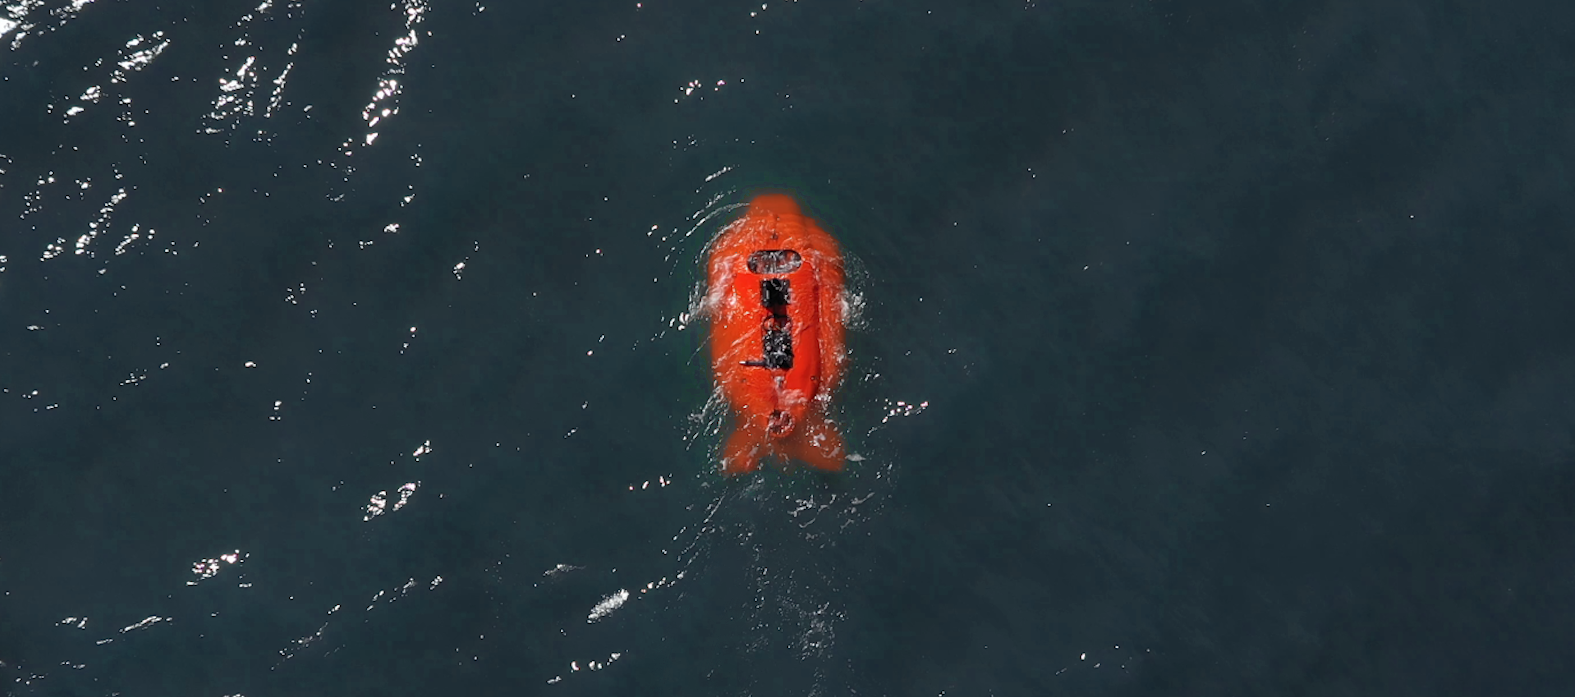 Aerialview of Aquanaut in the water.